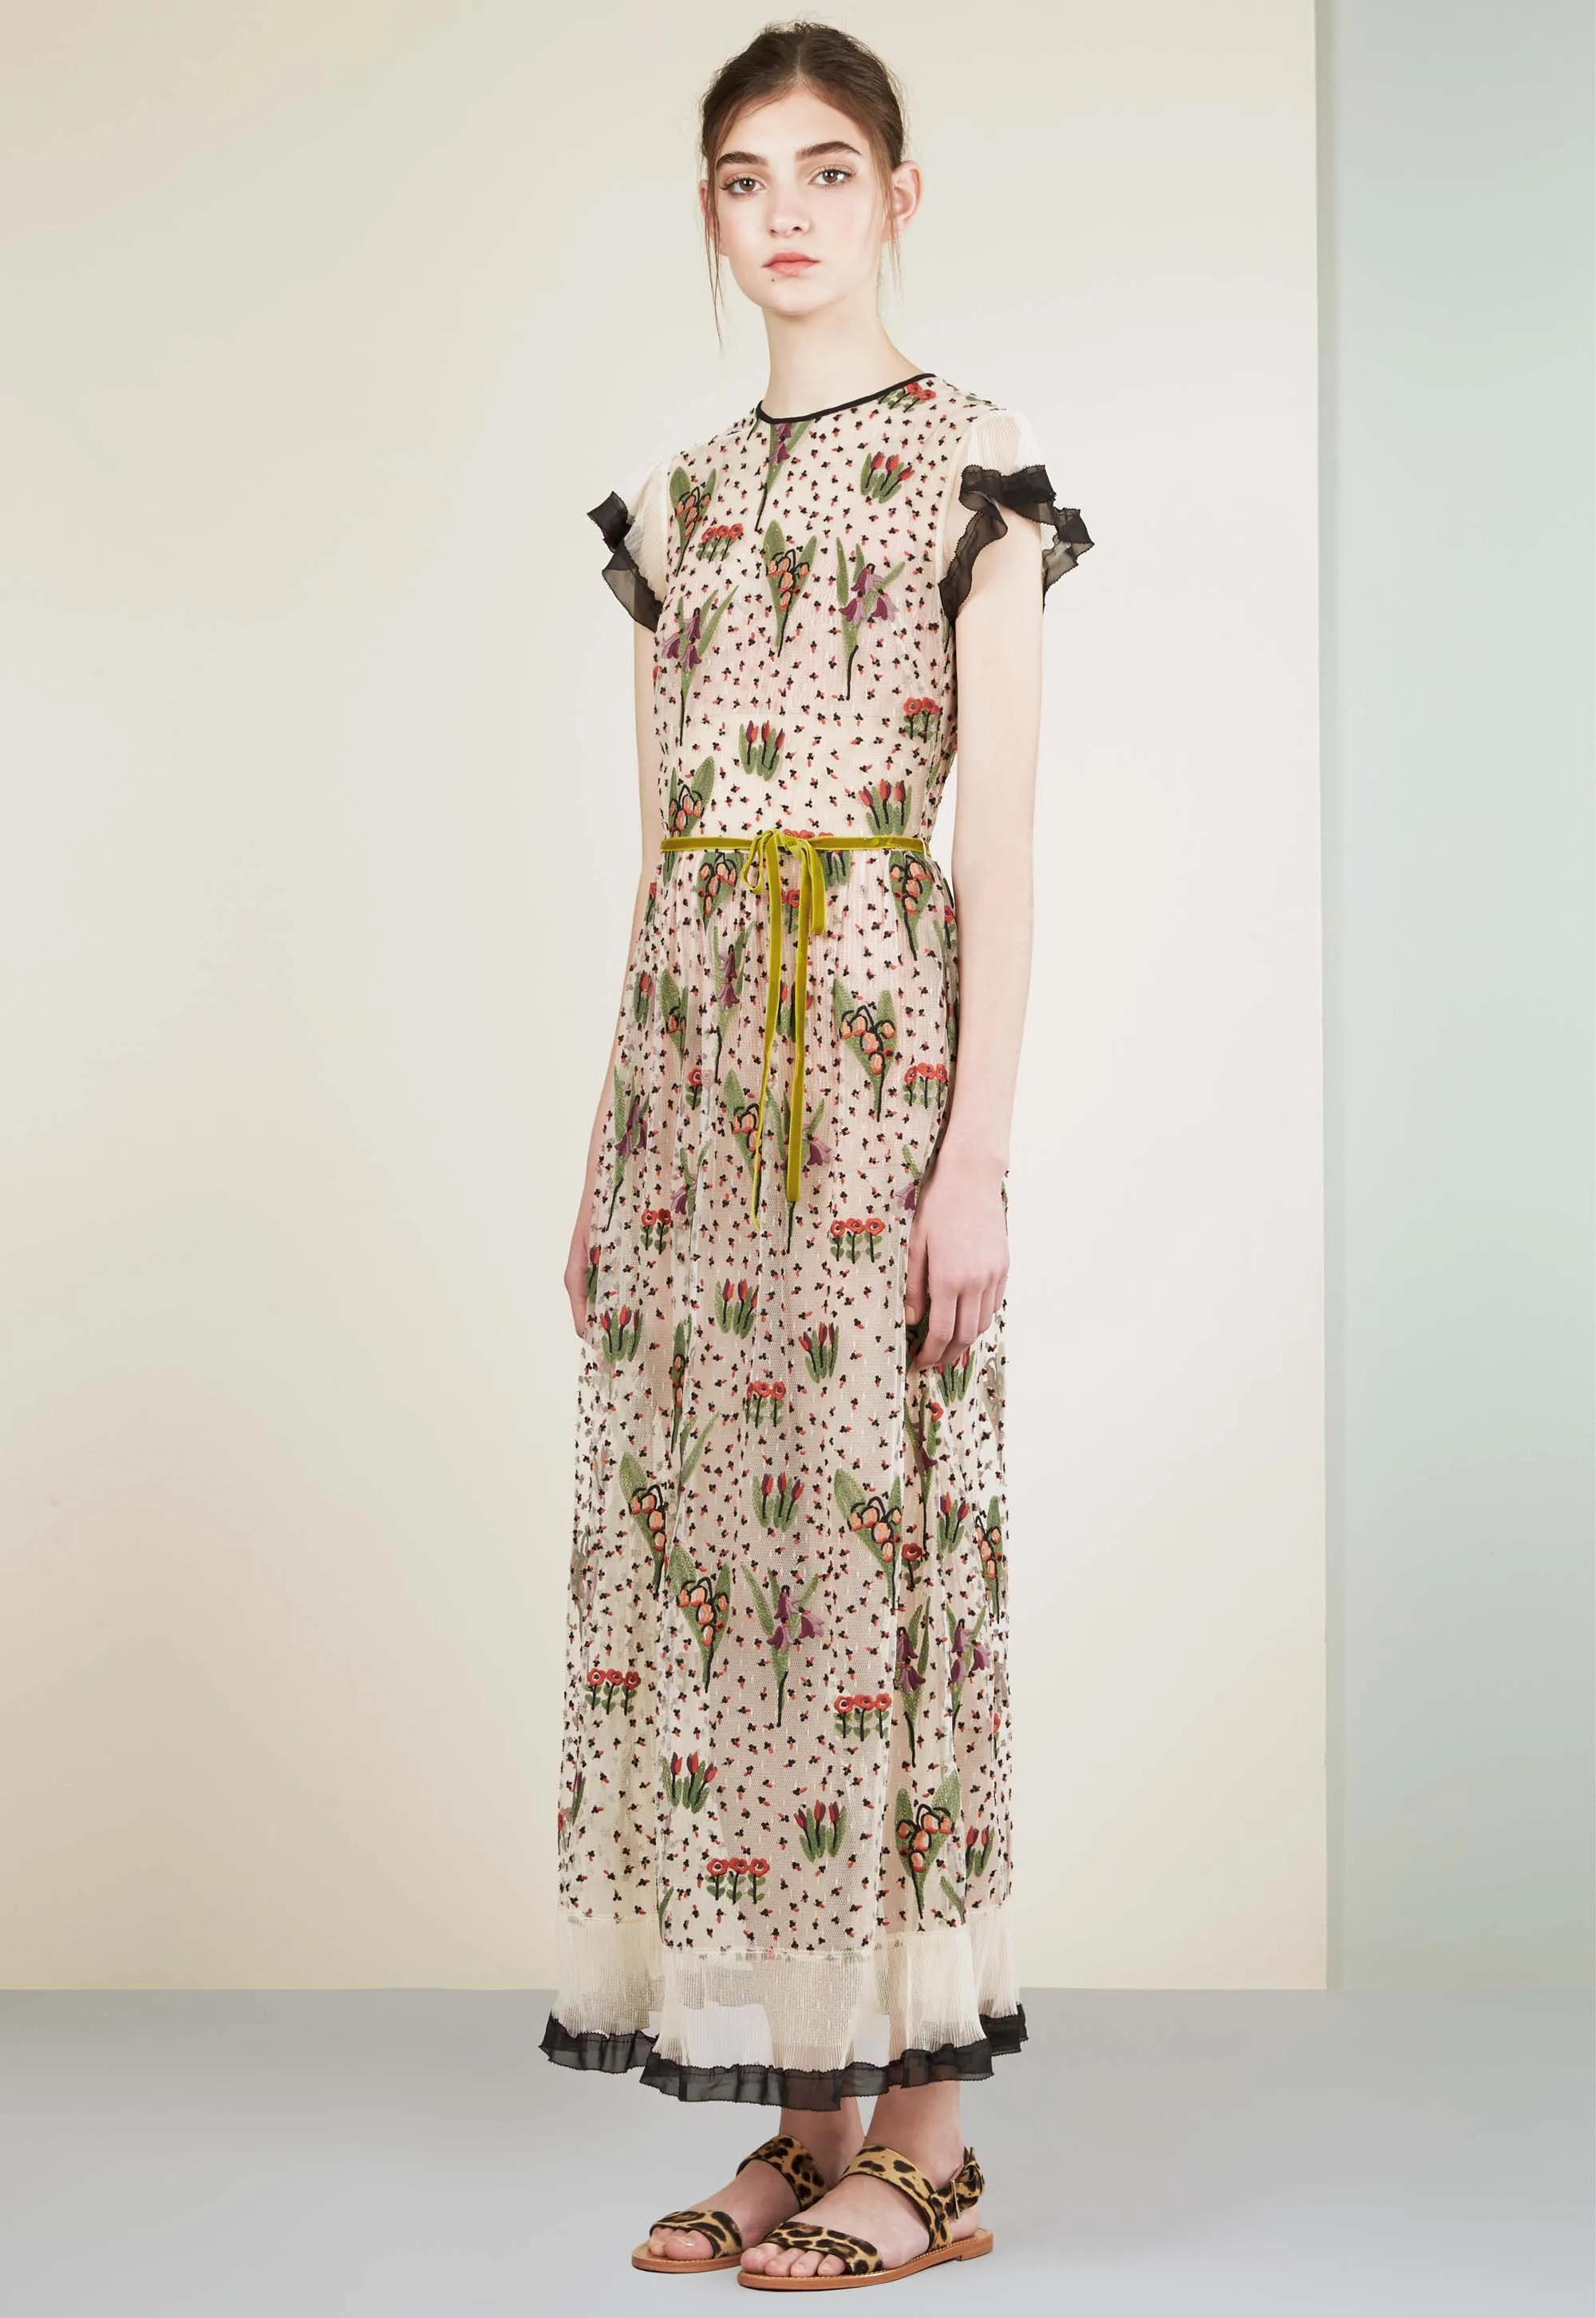 A RED VALENTINO GARDEN EMBROIDERED DRESS - Image 3 of 5